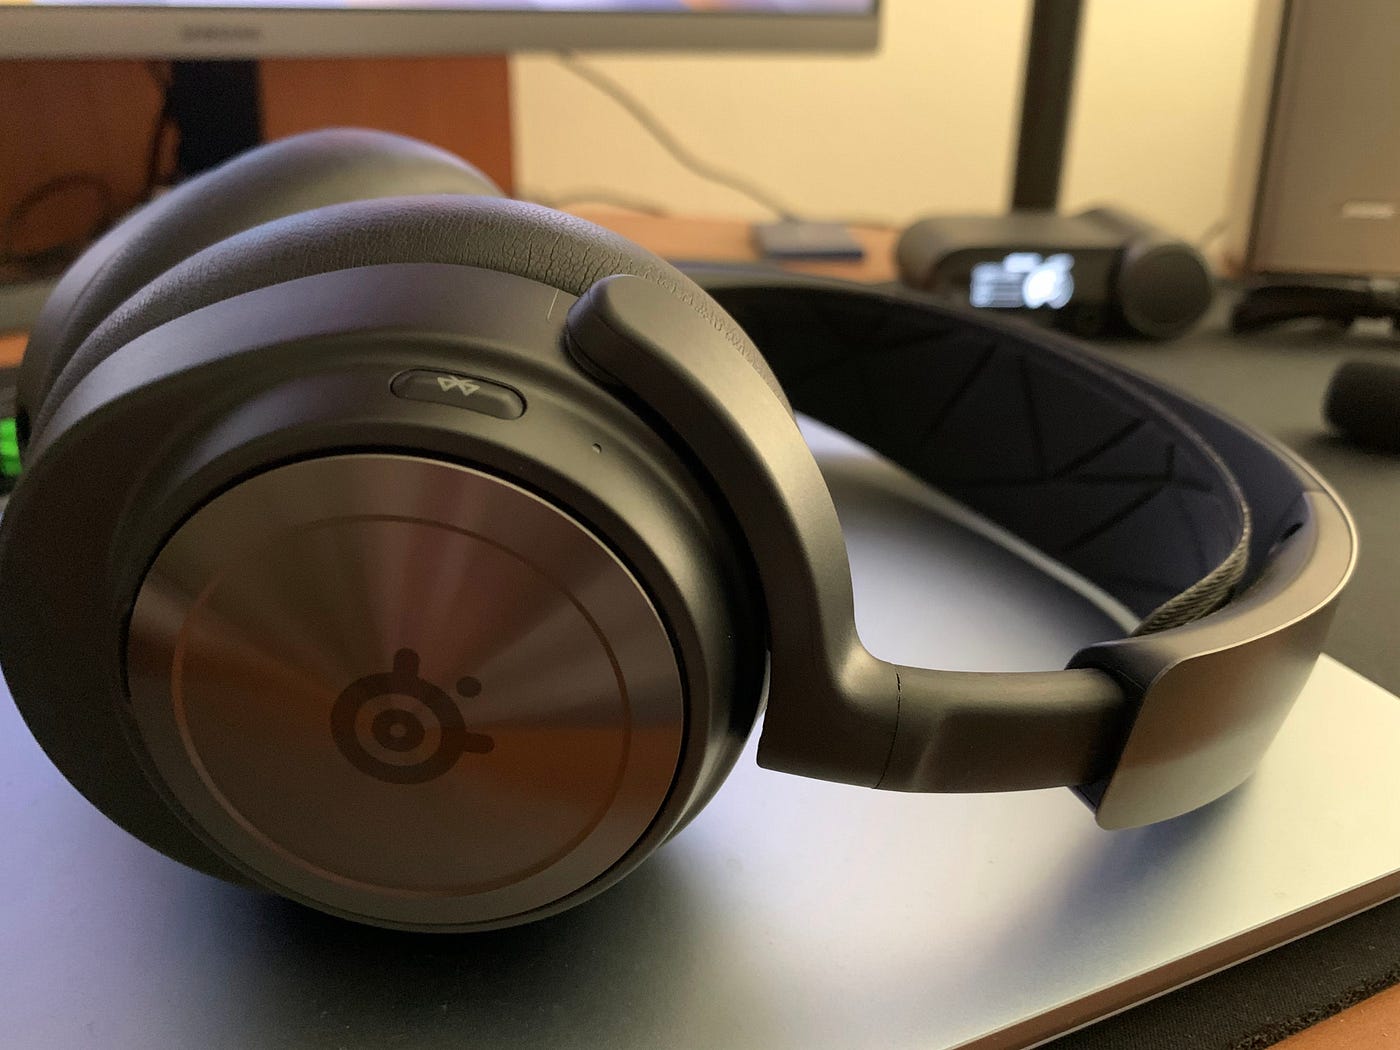 Sony Pulse 3D Wireless Gaming Headset Review, by Alex Rowe